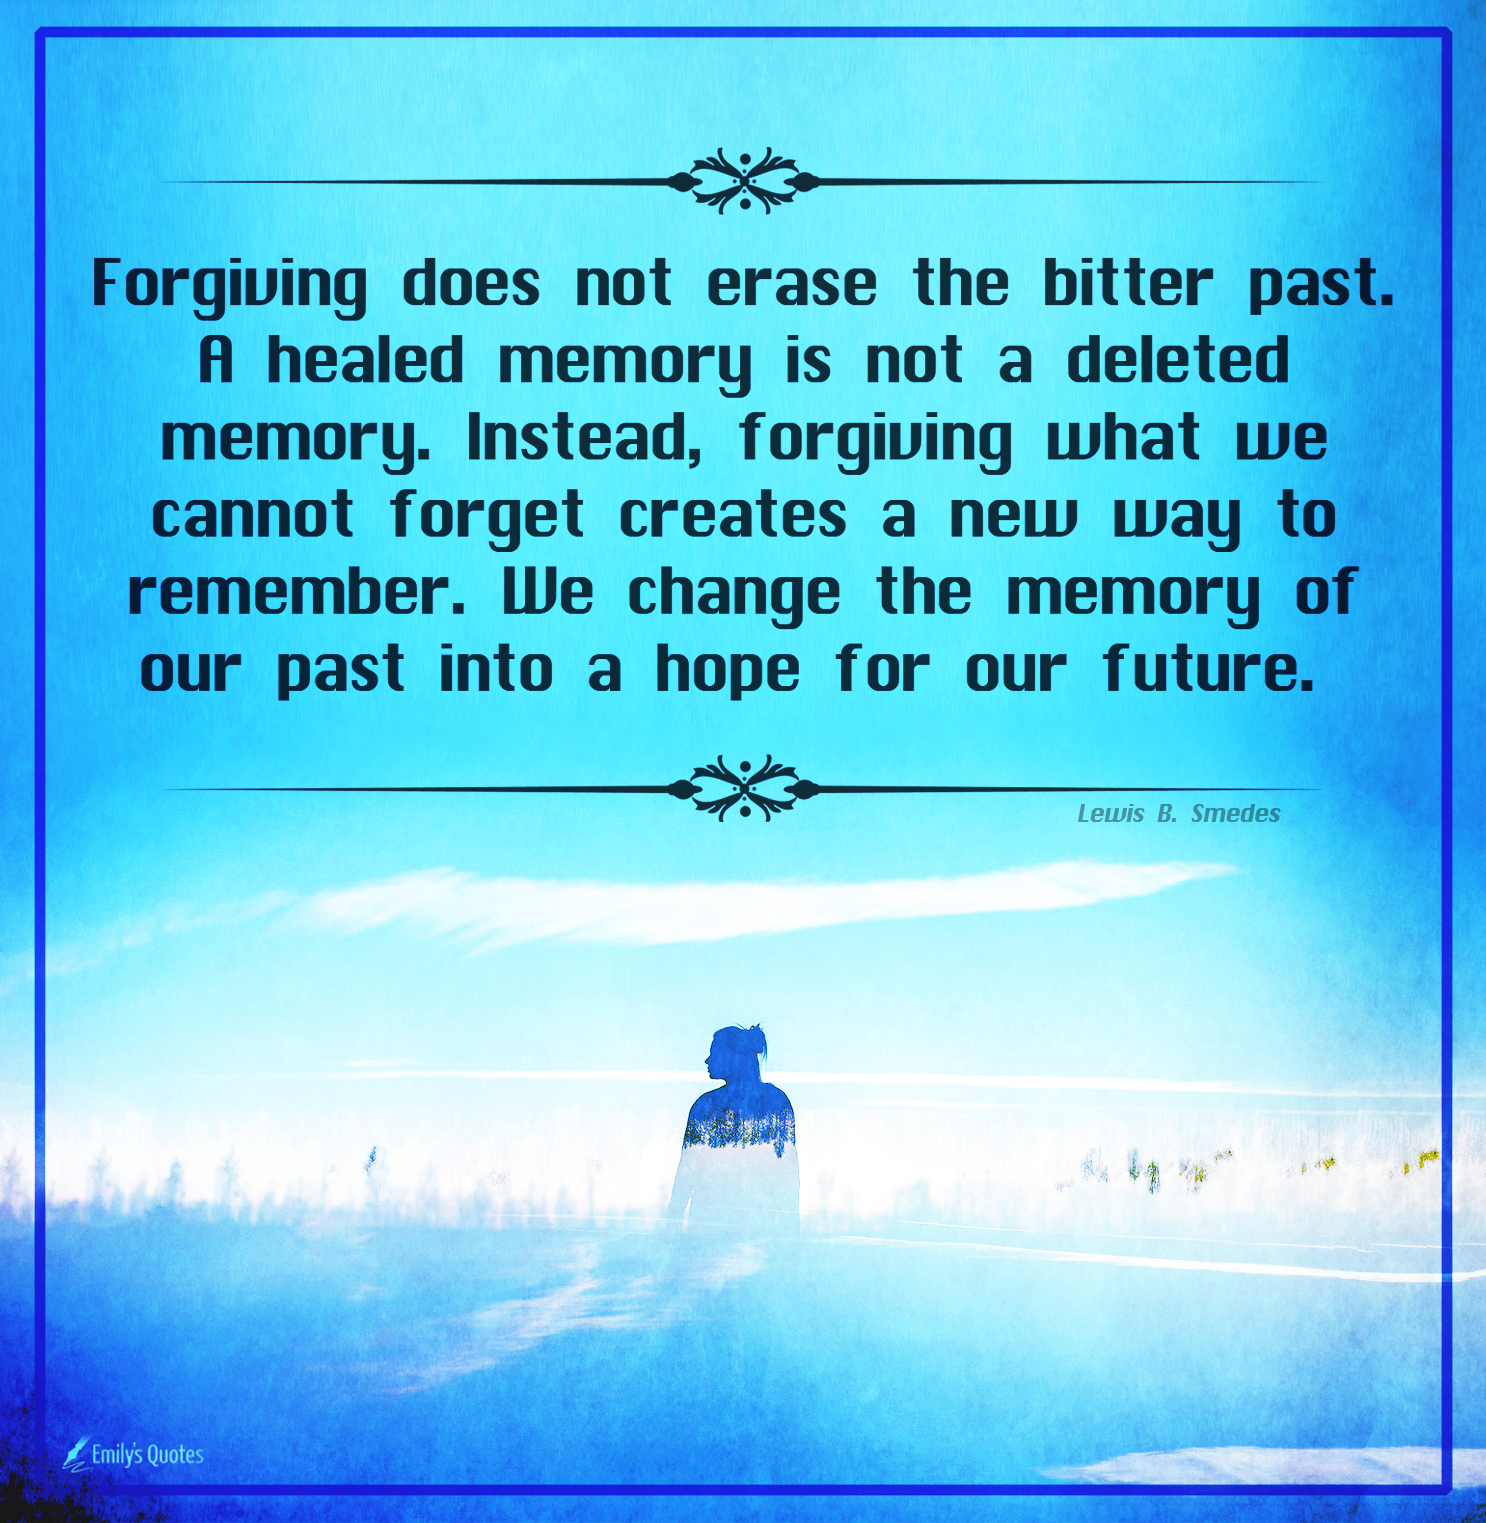 Forgiving does not erase the bitter past. A healed memory is not a deleted memory. Instead